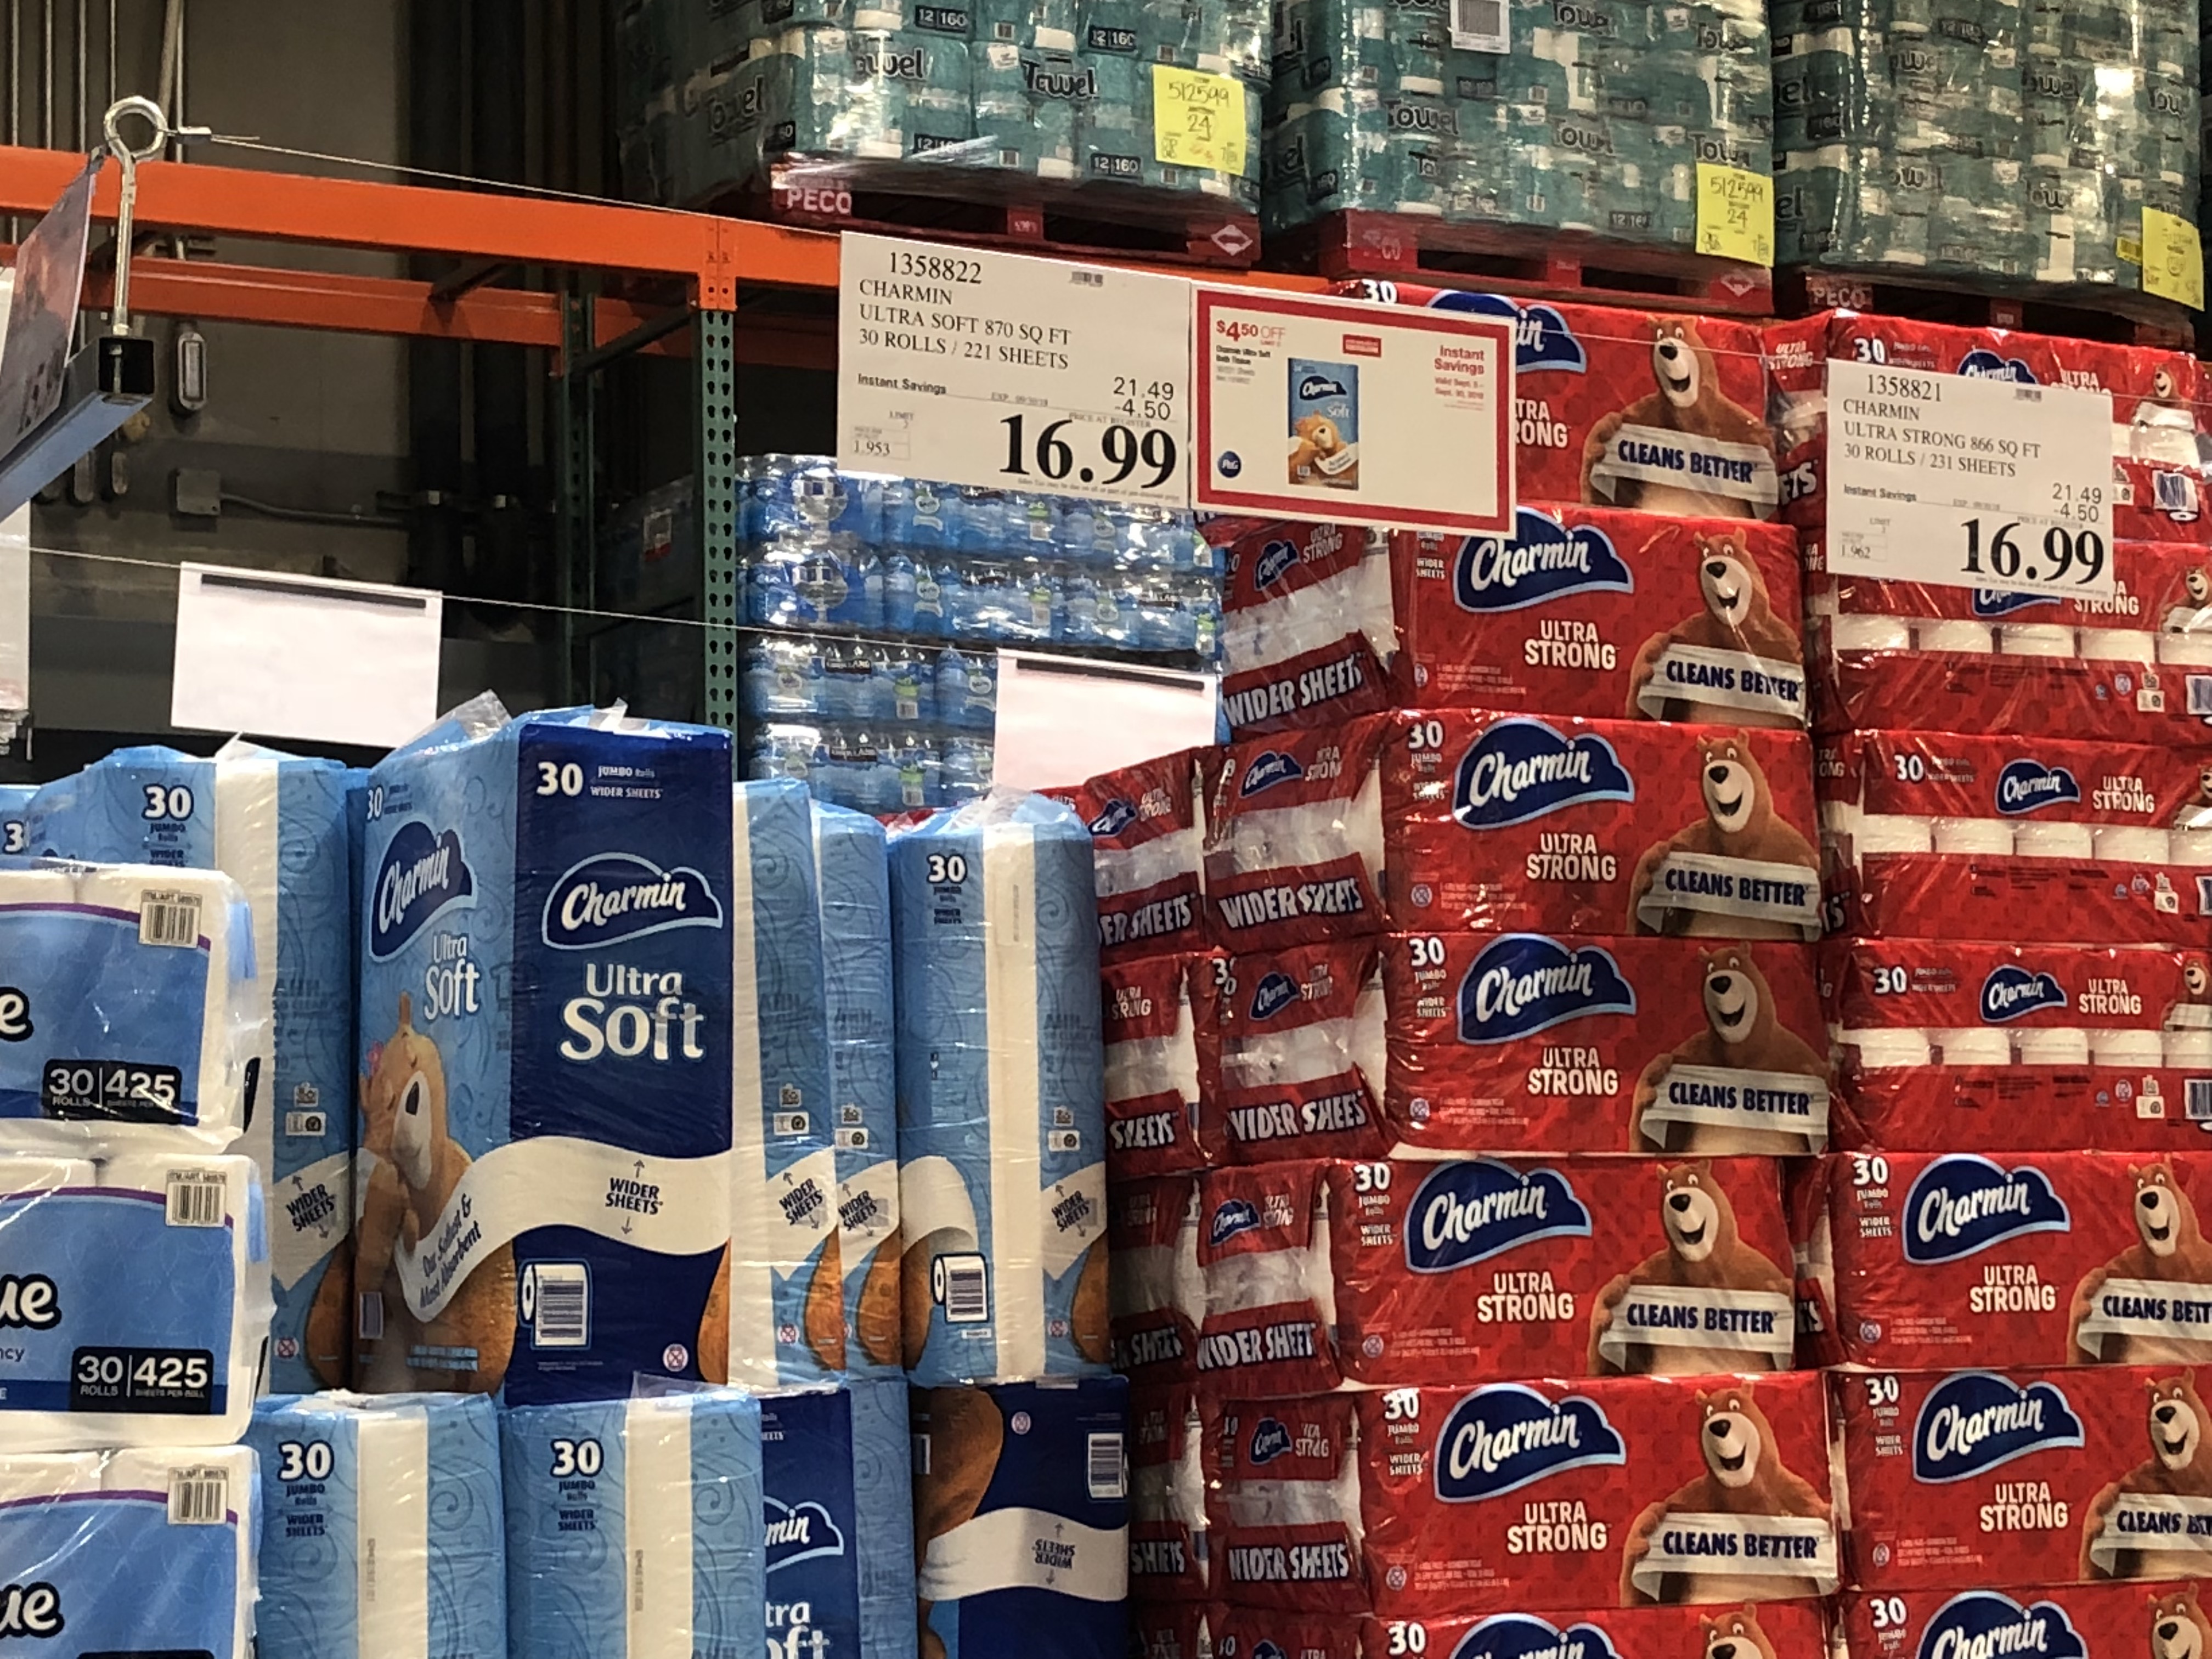 Costco Monthly Deals for September 2018 - Charmin toilet paper at Costco